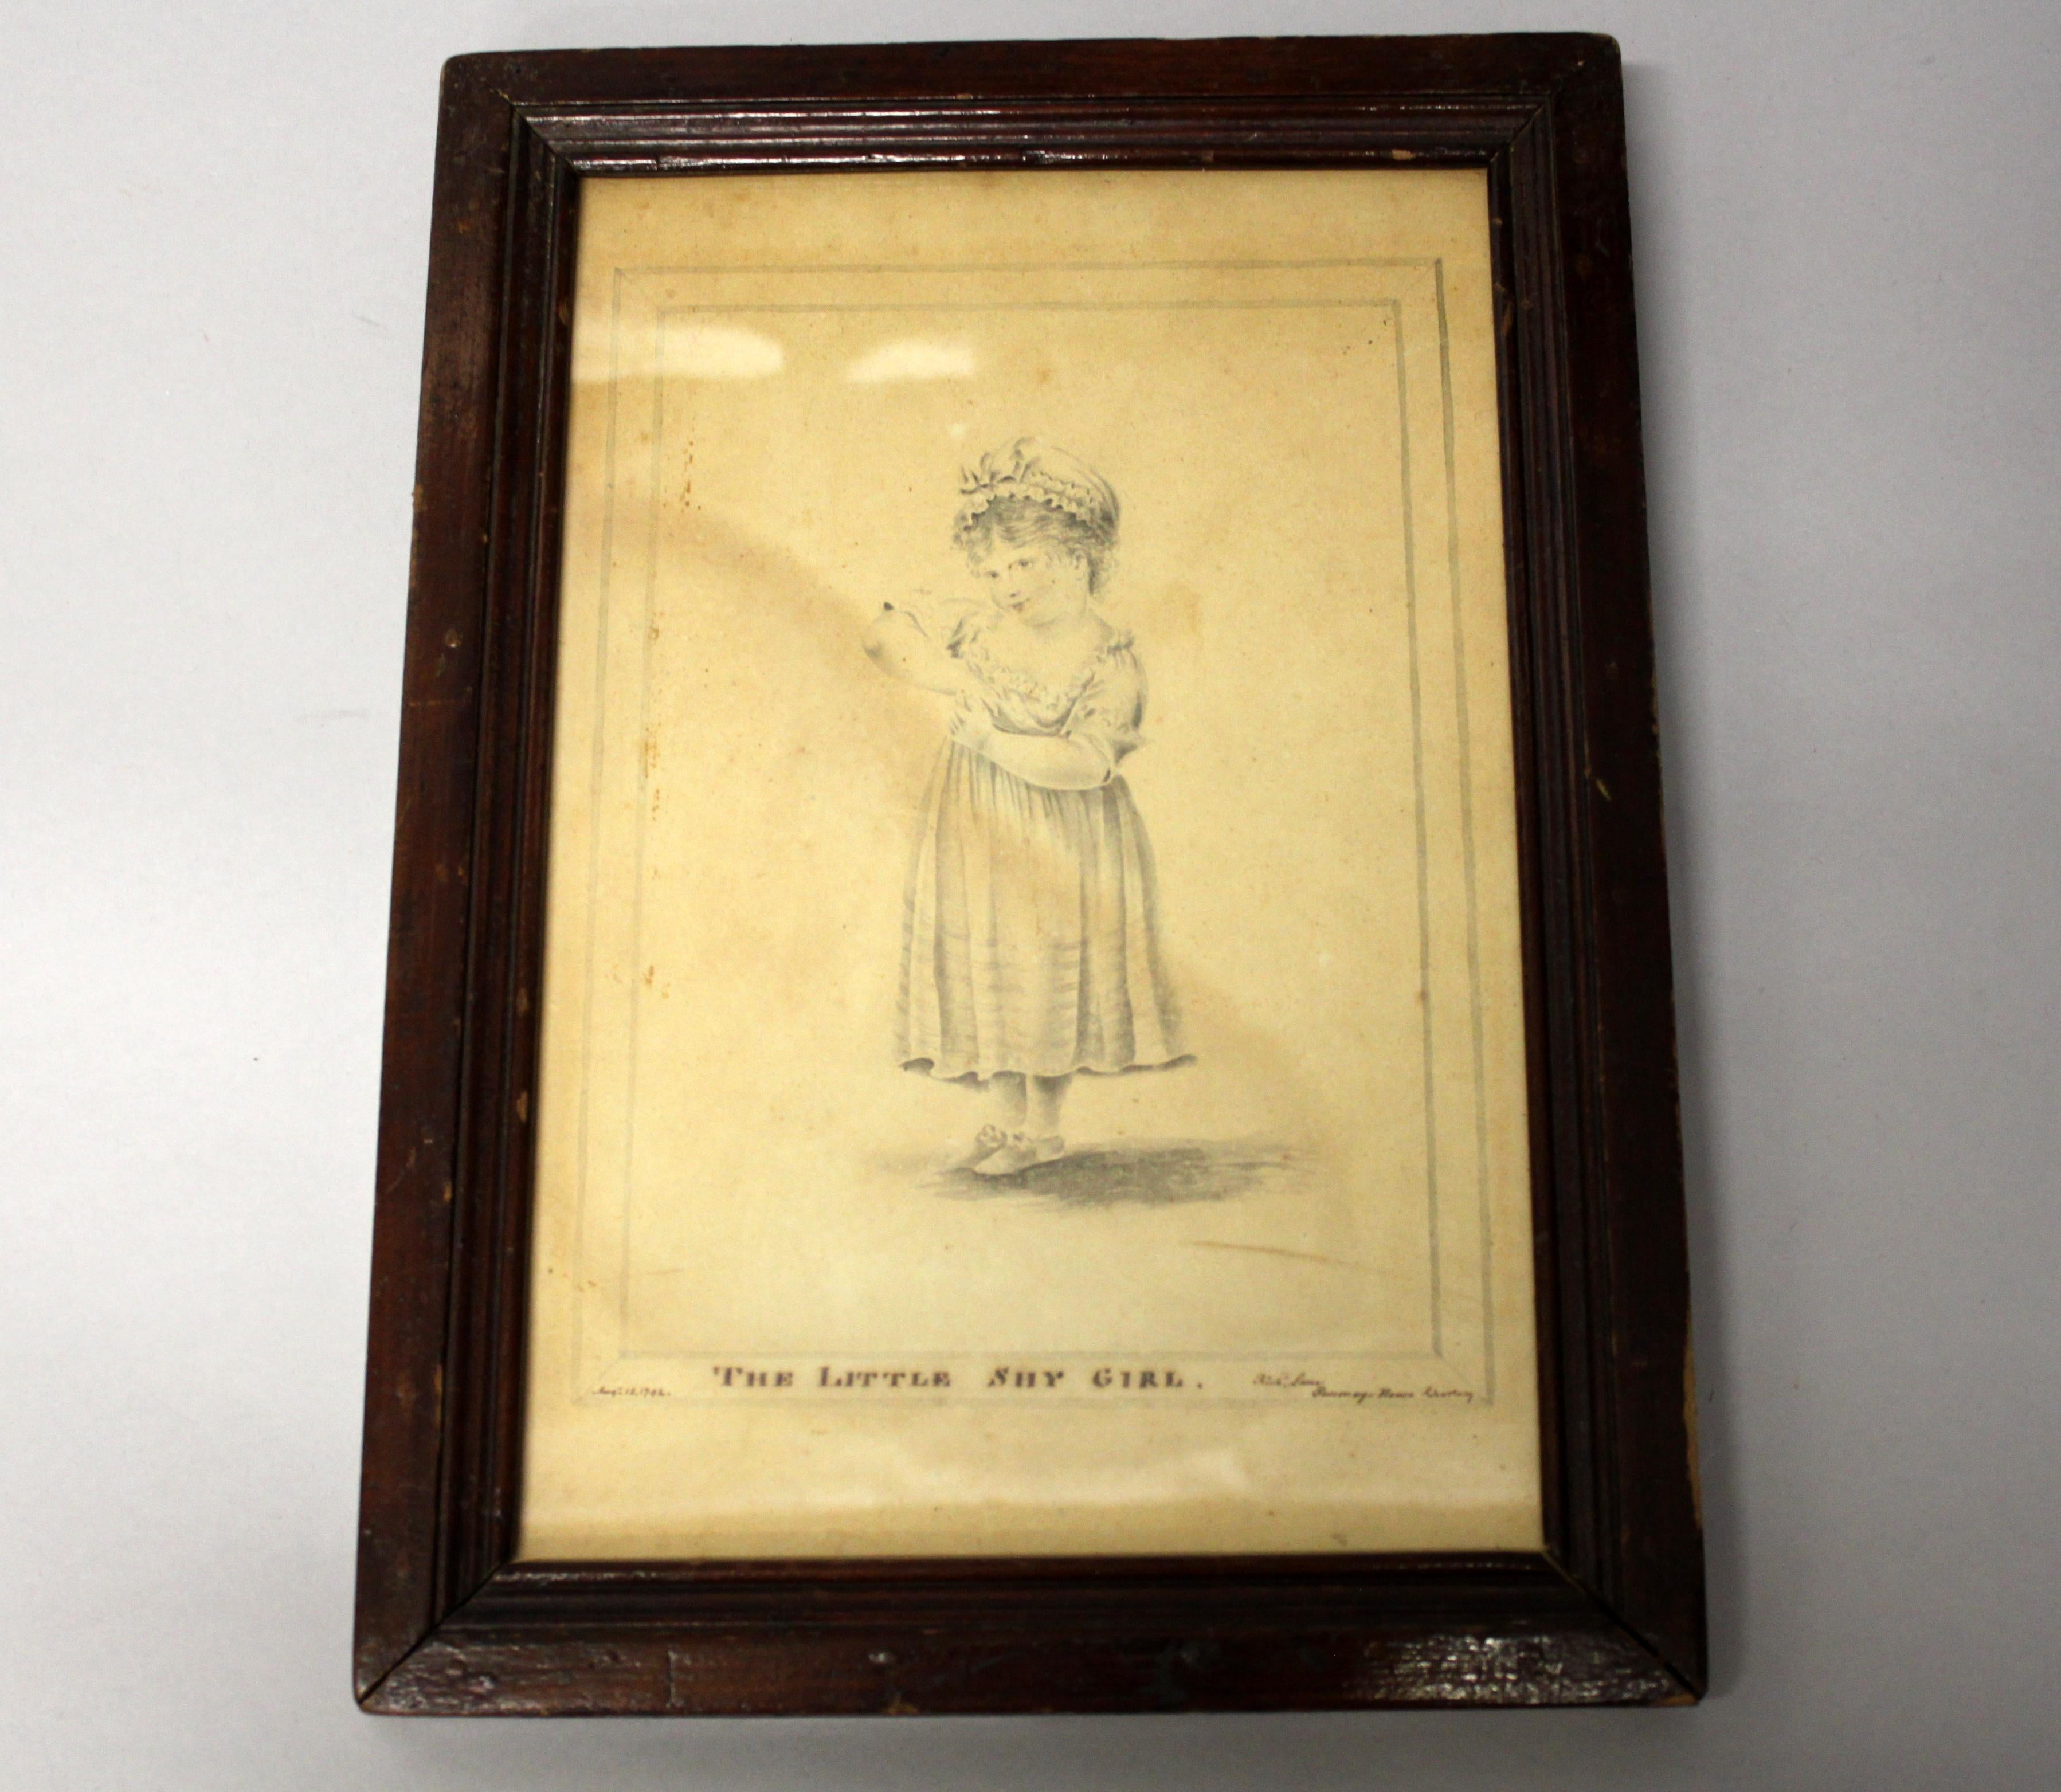 Antique drawing titled shy little girl.
Technique: Etching
Date: 1792
Artist: Rich Lane
Signed

Measures: Image size 21.5 × 15.5 cm
Total dimensions 31 × 22 × 1.8 cm
Weight 602 grams

Condition: General wear and tear with some age related